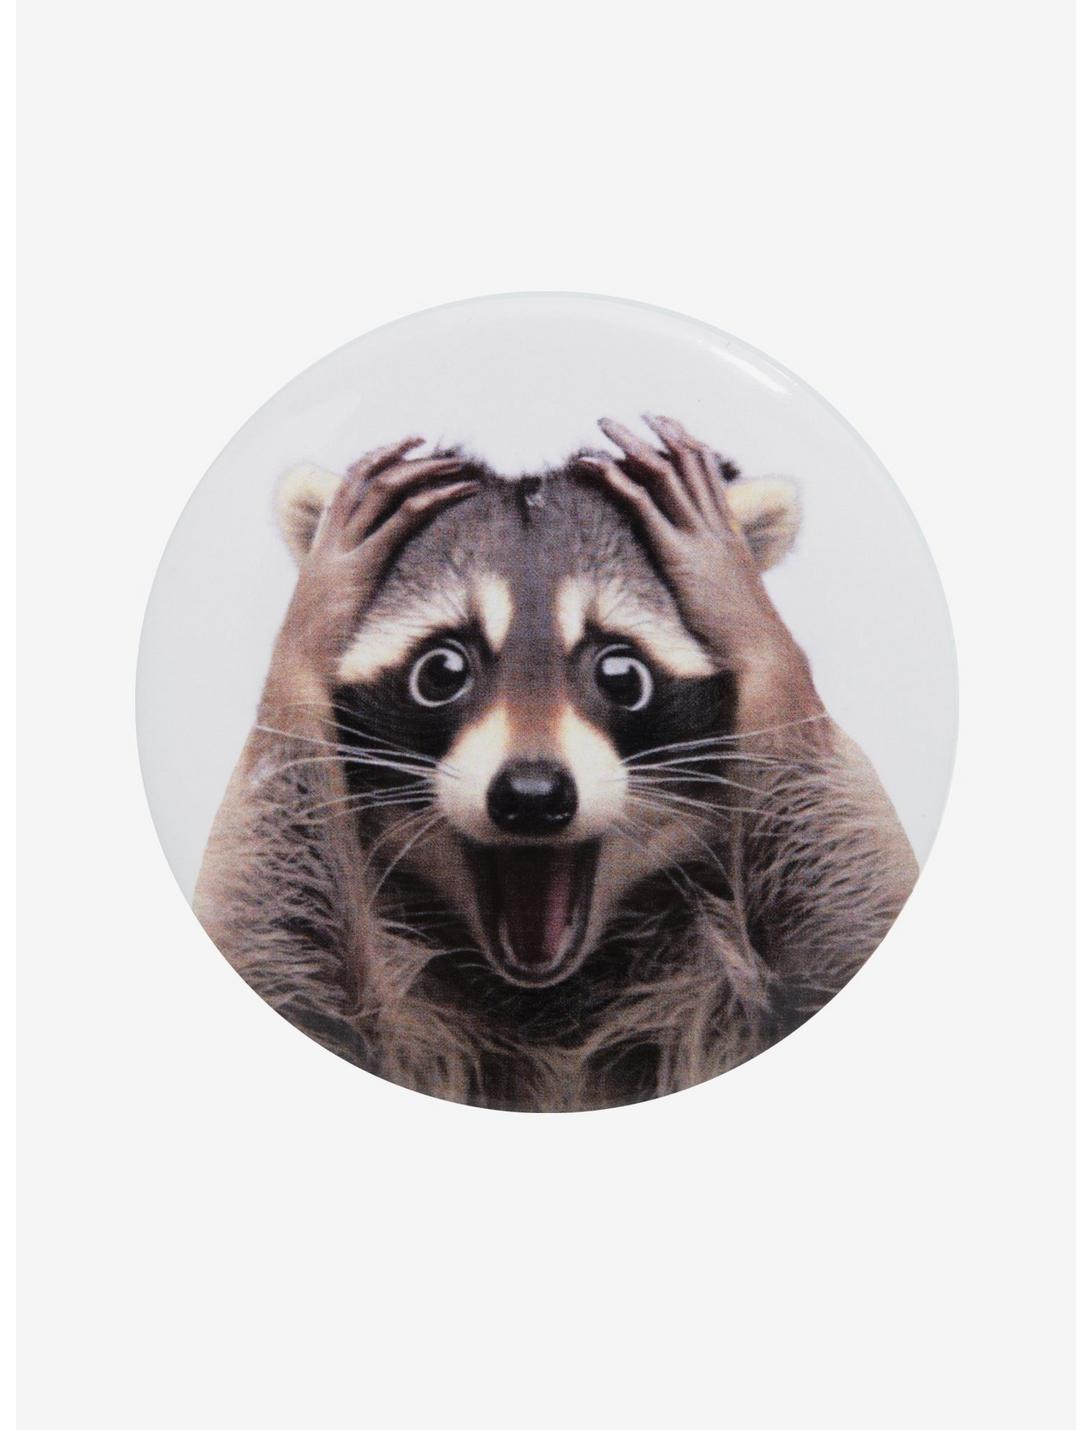 Shocked Raccoon 3 Inch Button, , hi-res